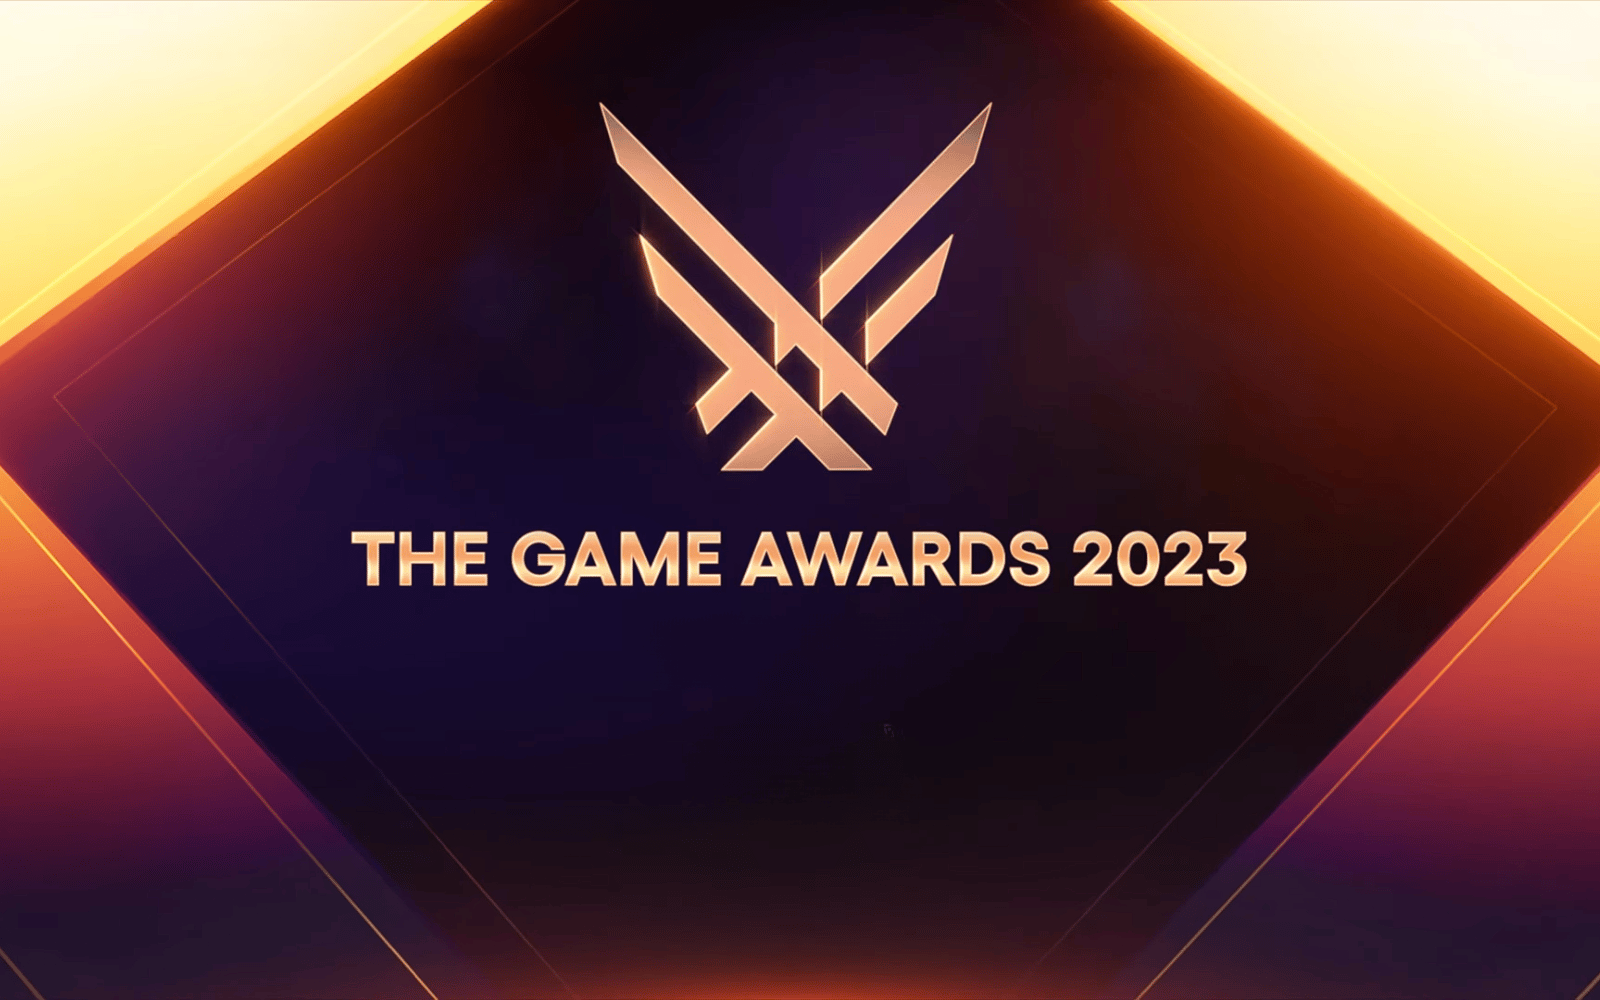 Online Game Awards Announcements 2024